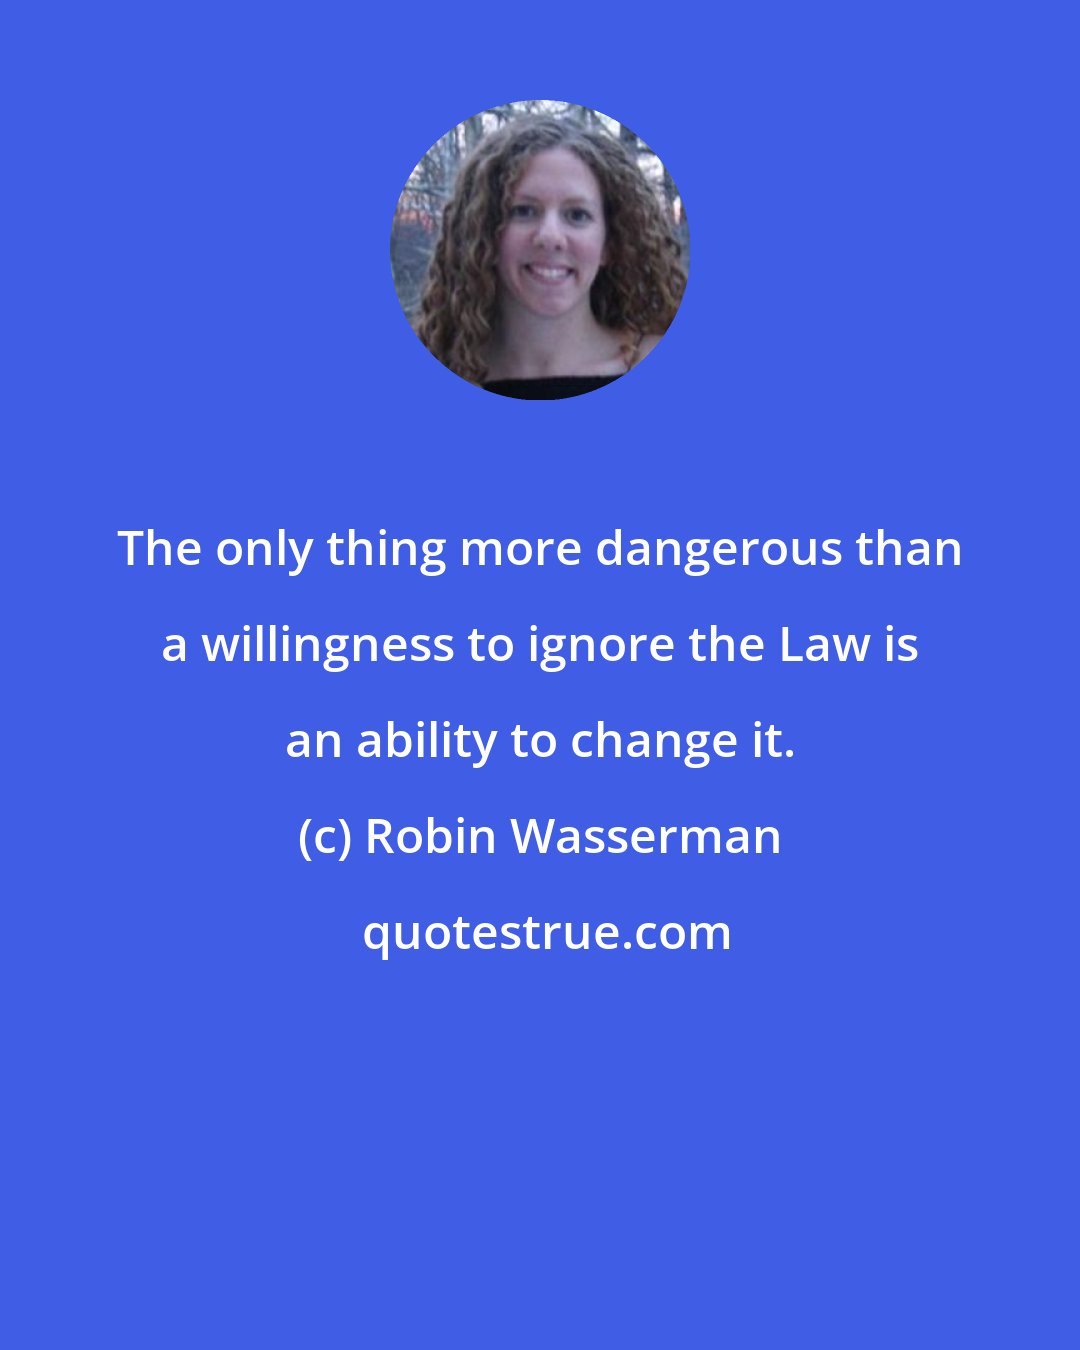 Robin Wasserman: The only thing more dangerous than a willingness to ignore the Law is an ability to change it.